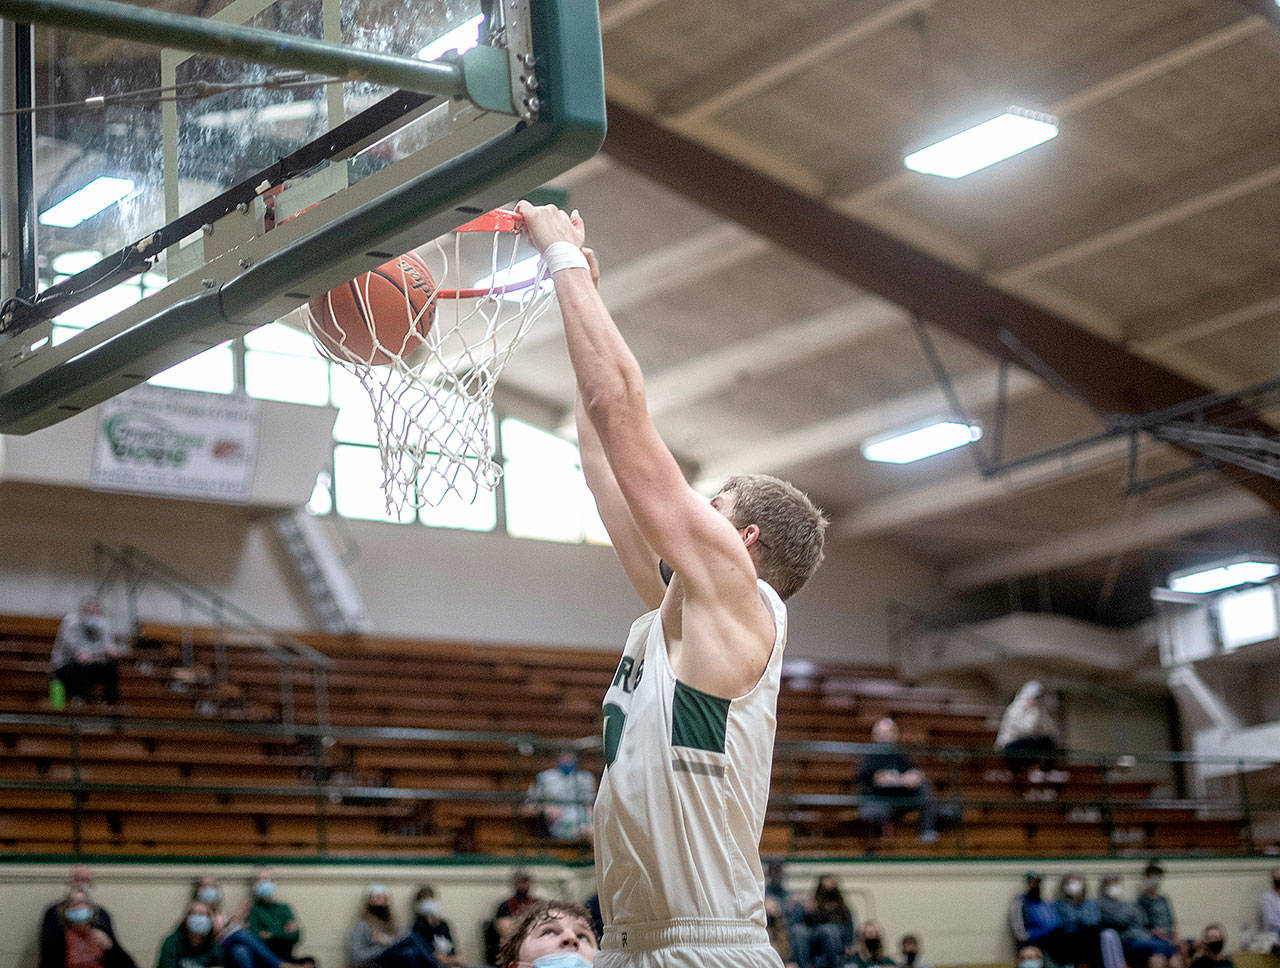 The Roughriders’ John Vaara dunks the ball for two of his 14 points against Central Kitsap on Monday in Port Angeles. The Riders won to qualify for the Olympic League championship game against defending state champion North Kitsap on Wednesday night. (Jesse Major/for Peninsula Daily News)